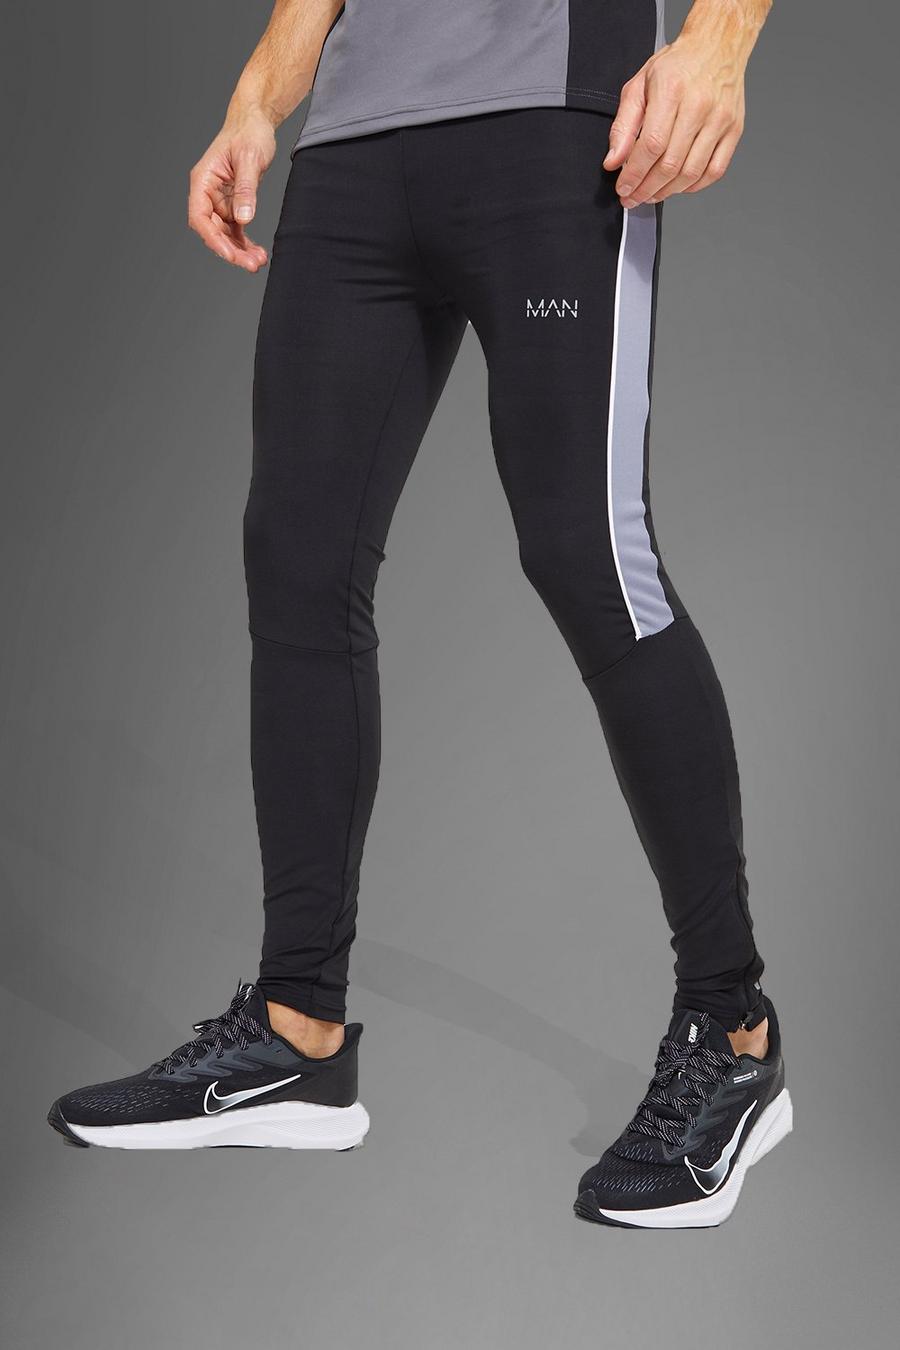 Black negro Tall Man Active Gym Contrast Piping Legging